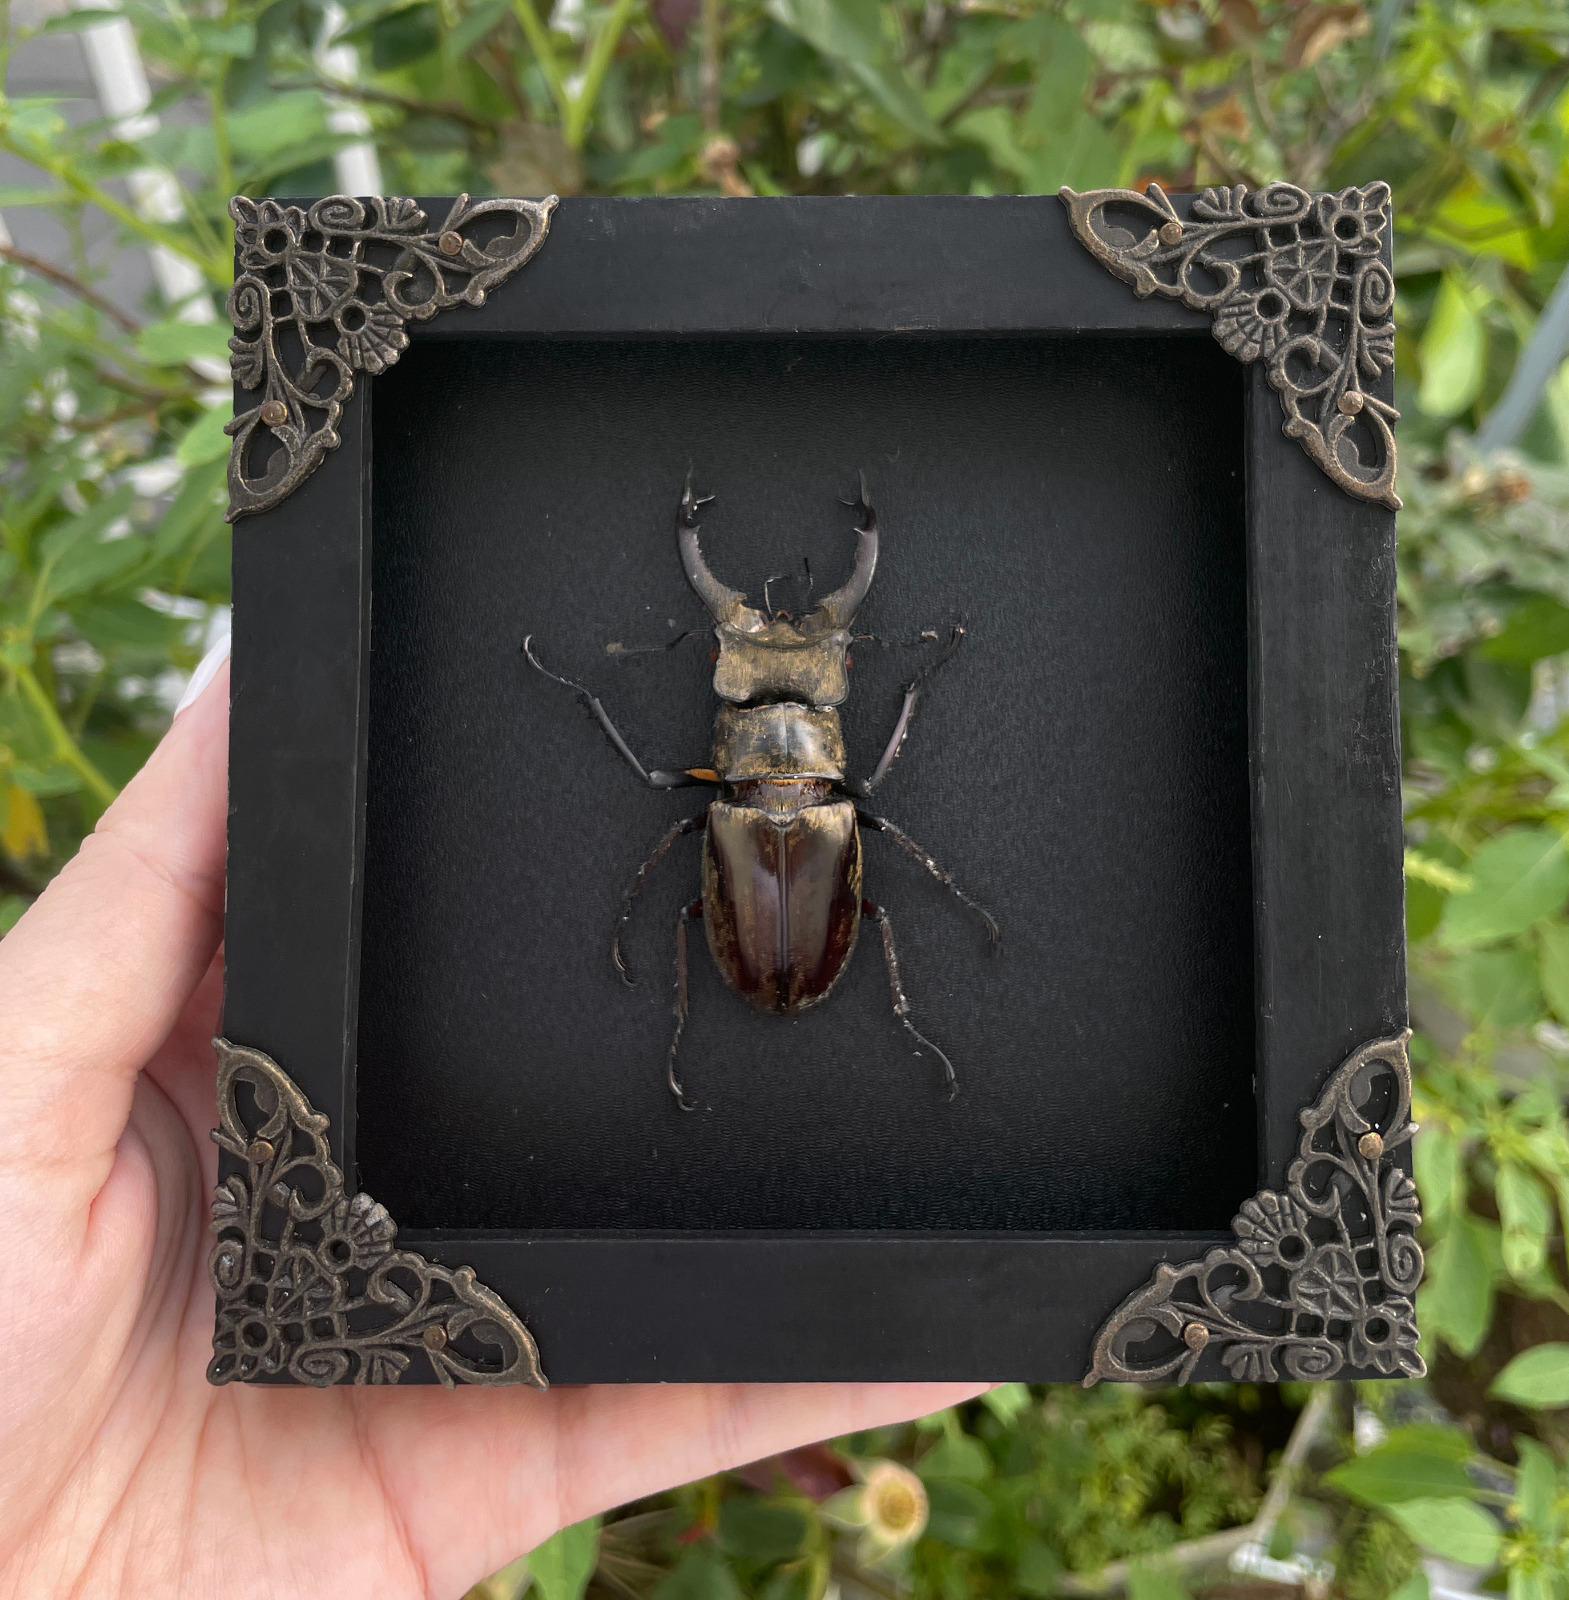 Real Insect Beetle Framed Taxidermy Bugs Collections Entomology Gift Desk Decor